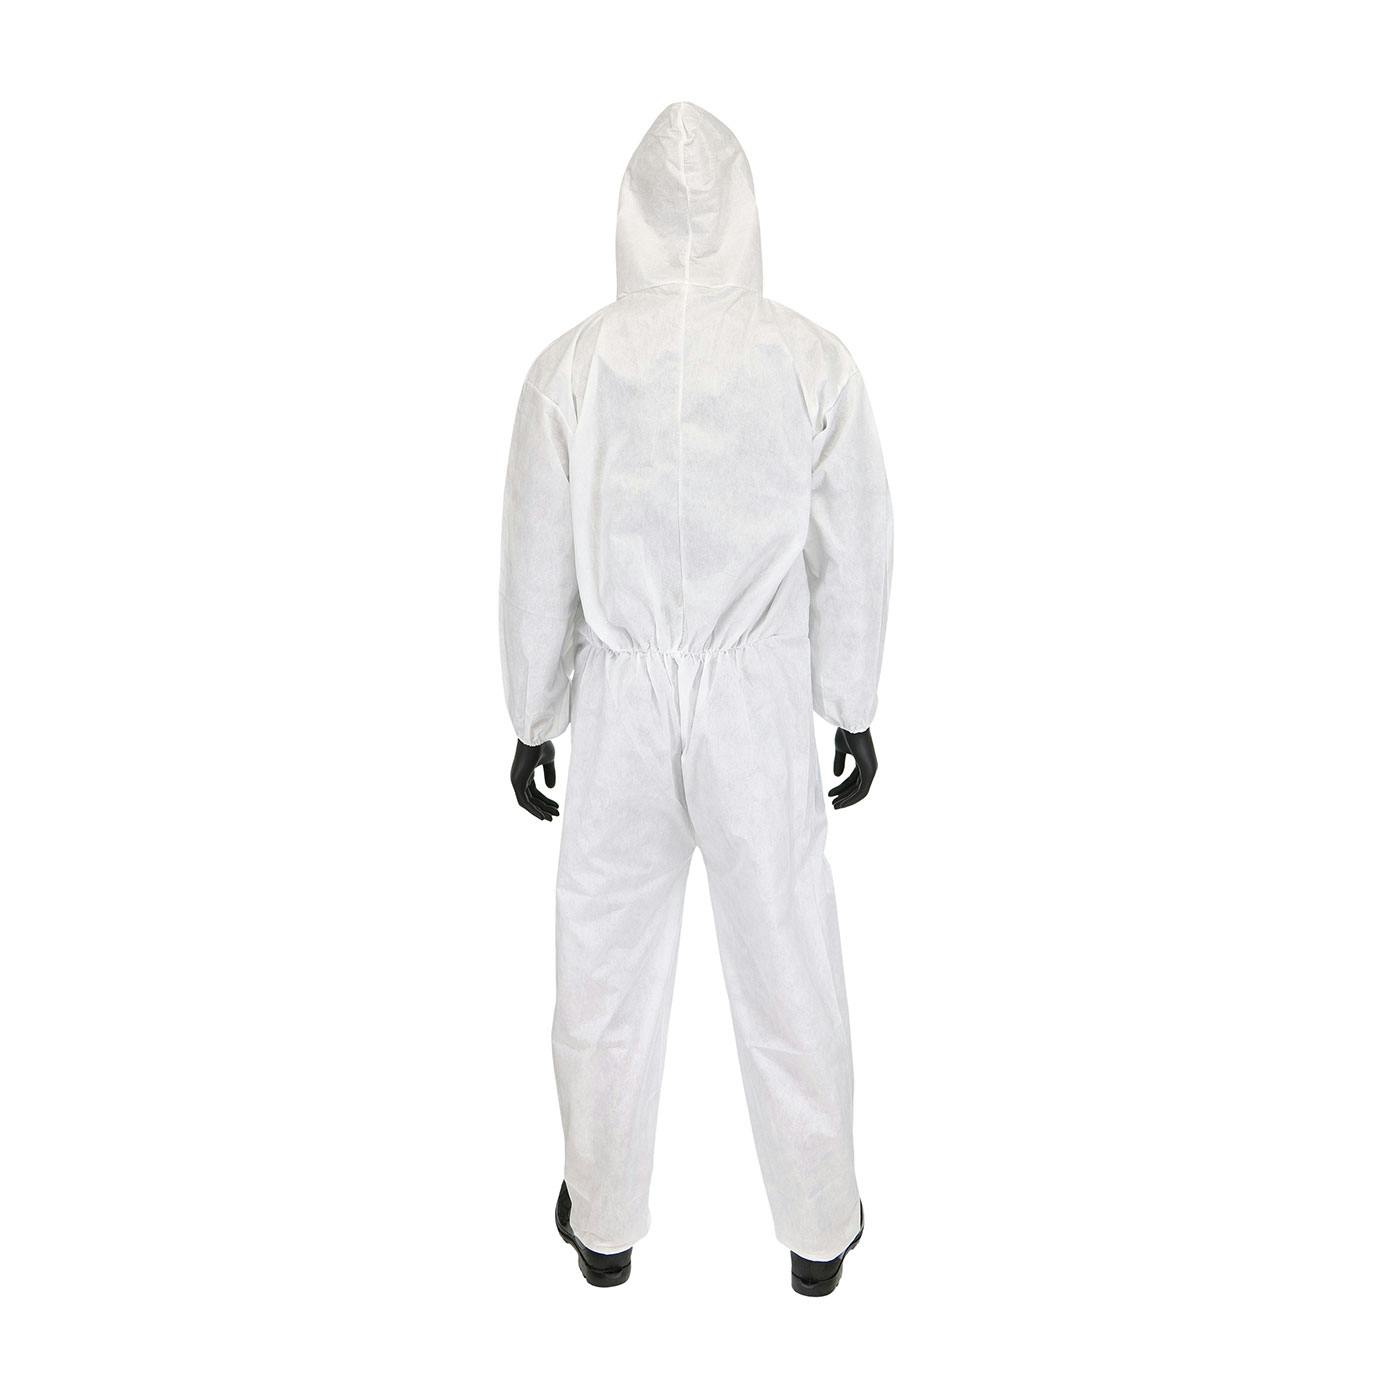 PosiWear M3 Coverall with Hood, Elastic Wrists & Ankles 50 gsm, White (C3806)